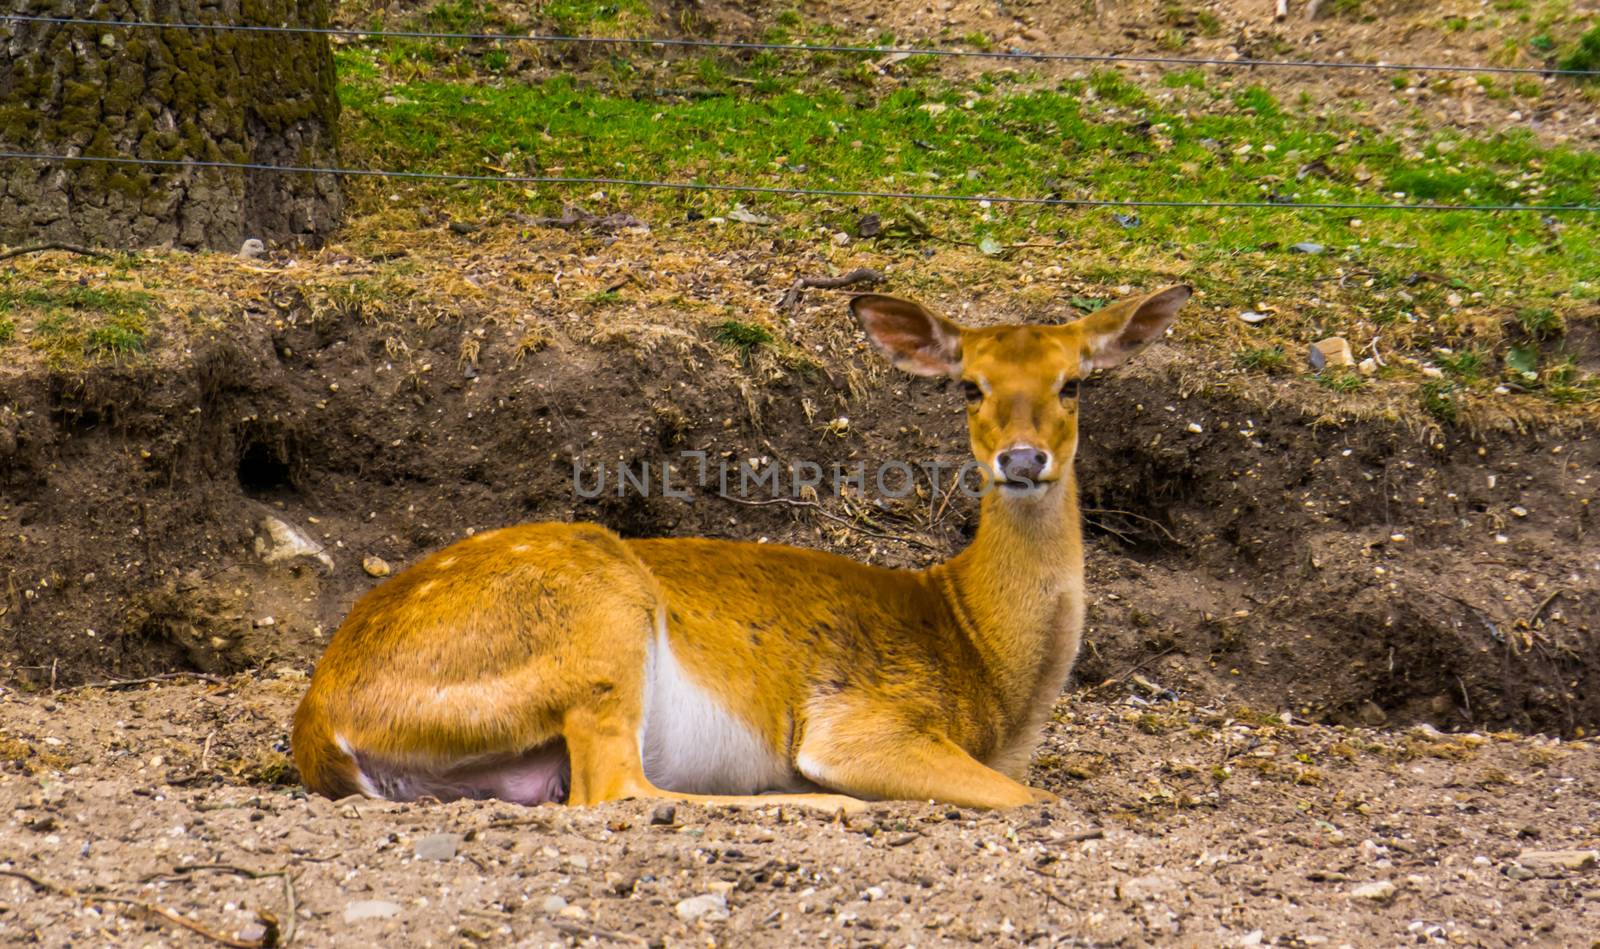 closeup portrait of a female eld's deer laying on the ground, Endangered animal specie from South Asia